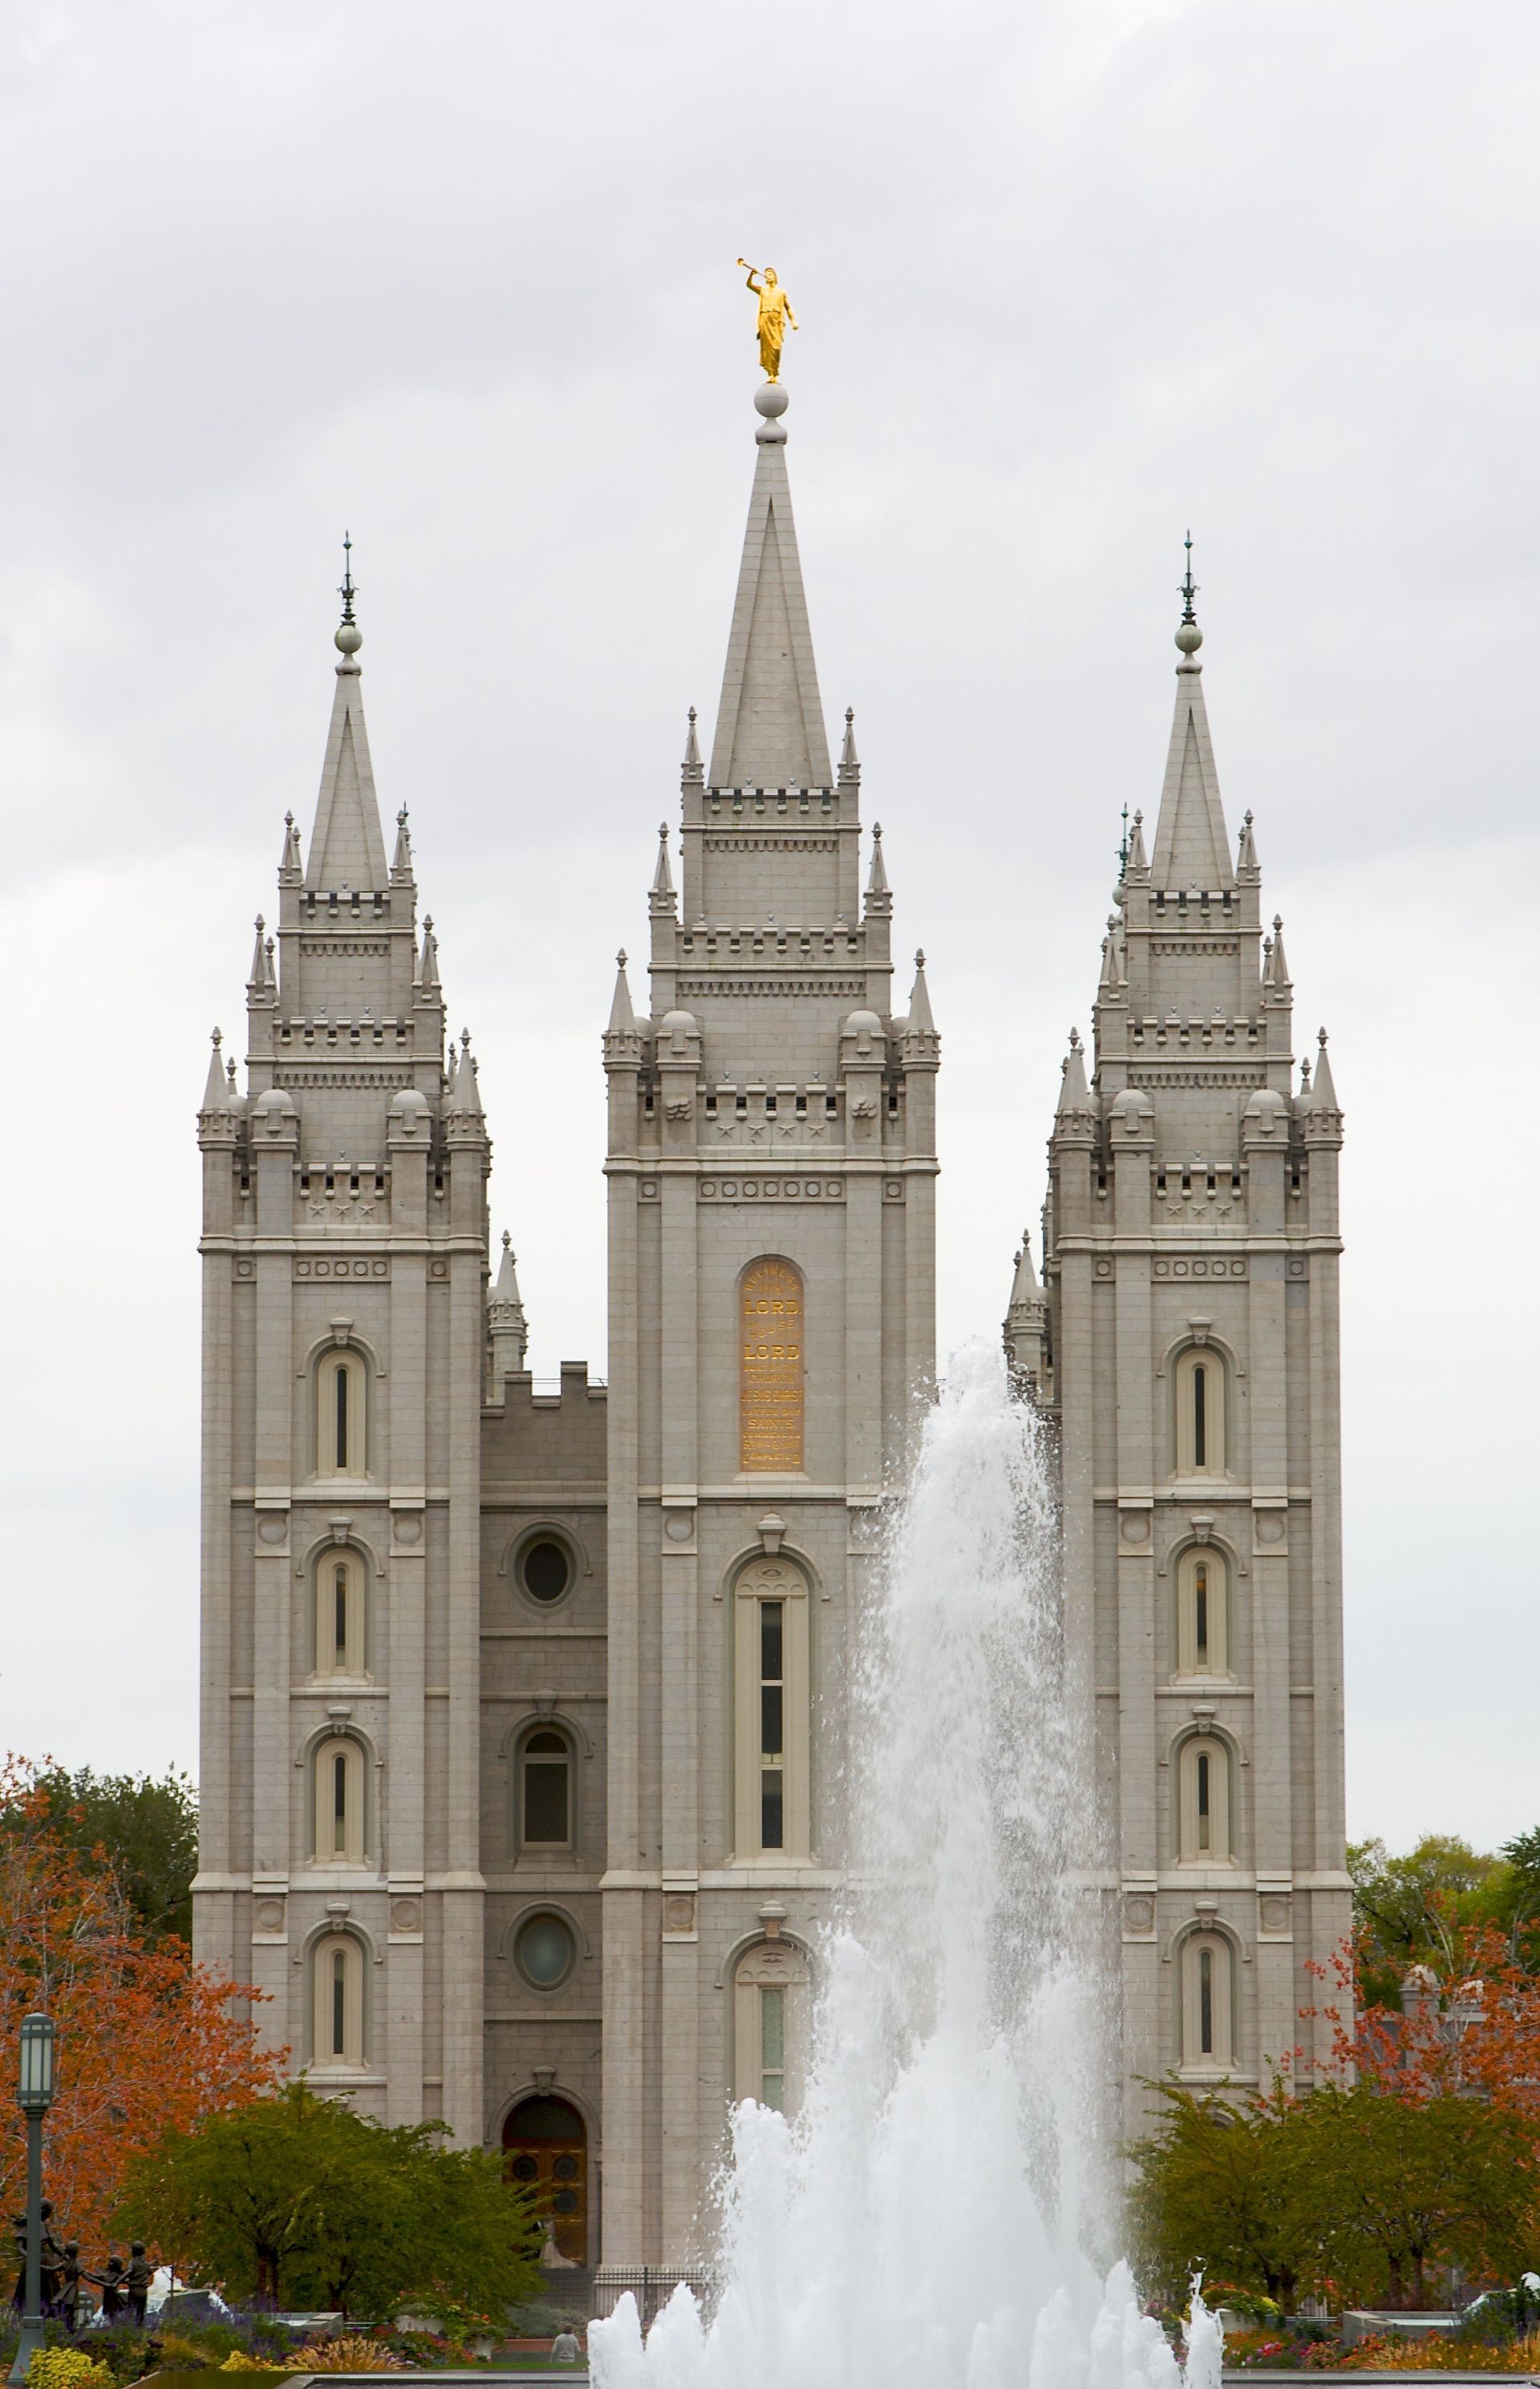 The Salt Lake Temple, including the fountain and scenery.